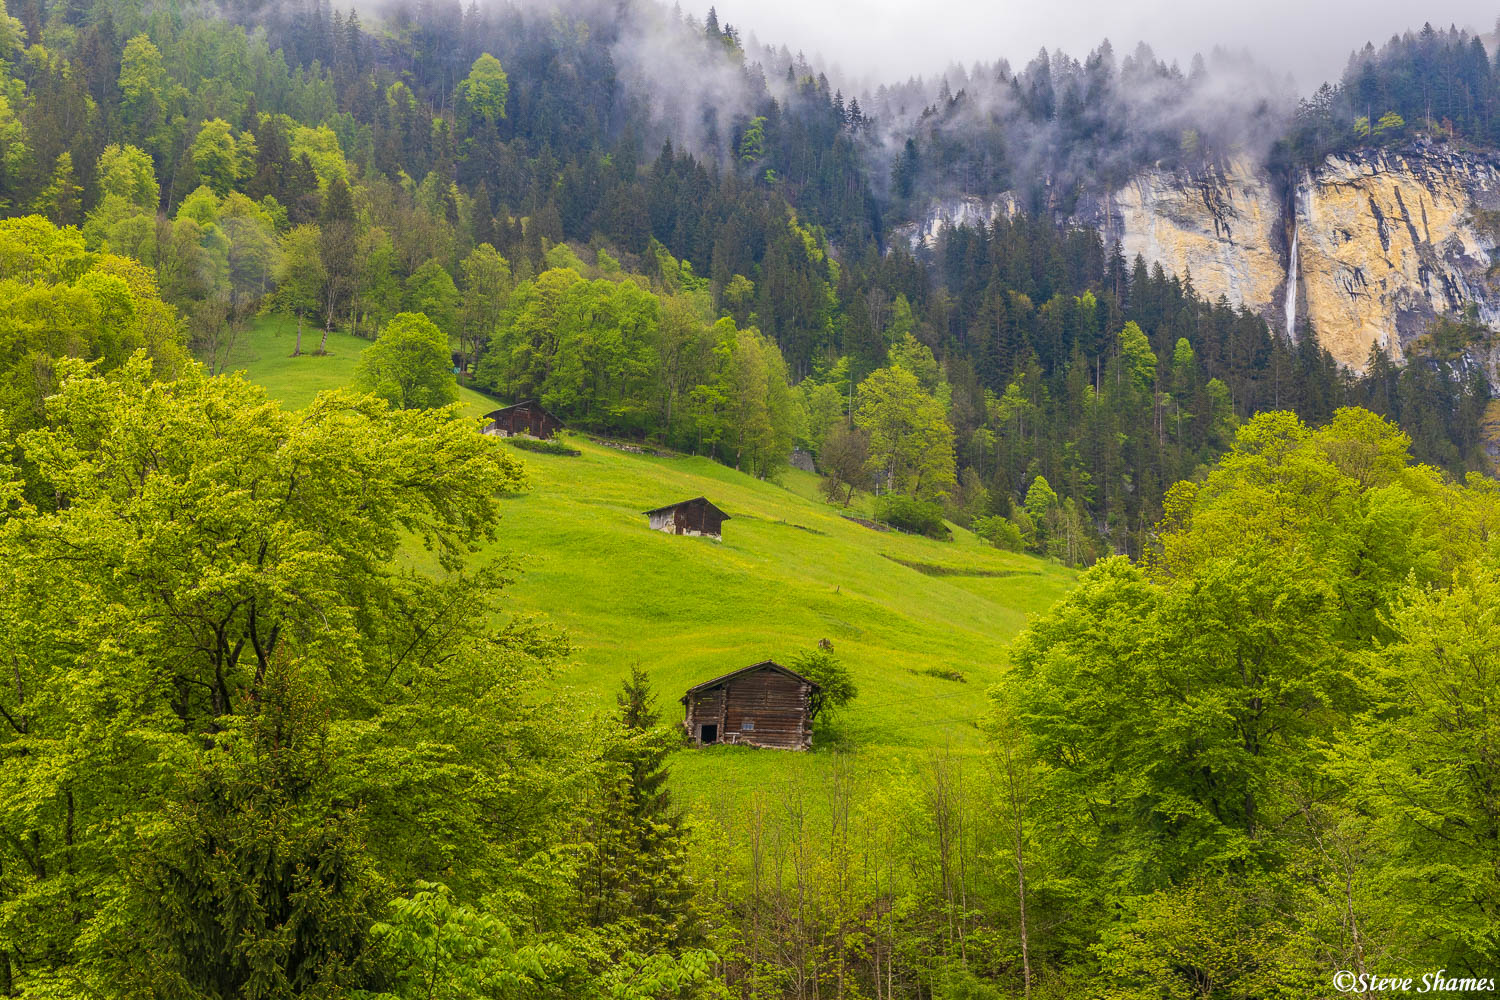 Little Swiss farm buildings, with a waterfall in the background.